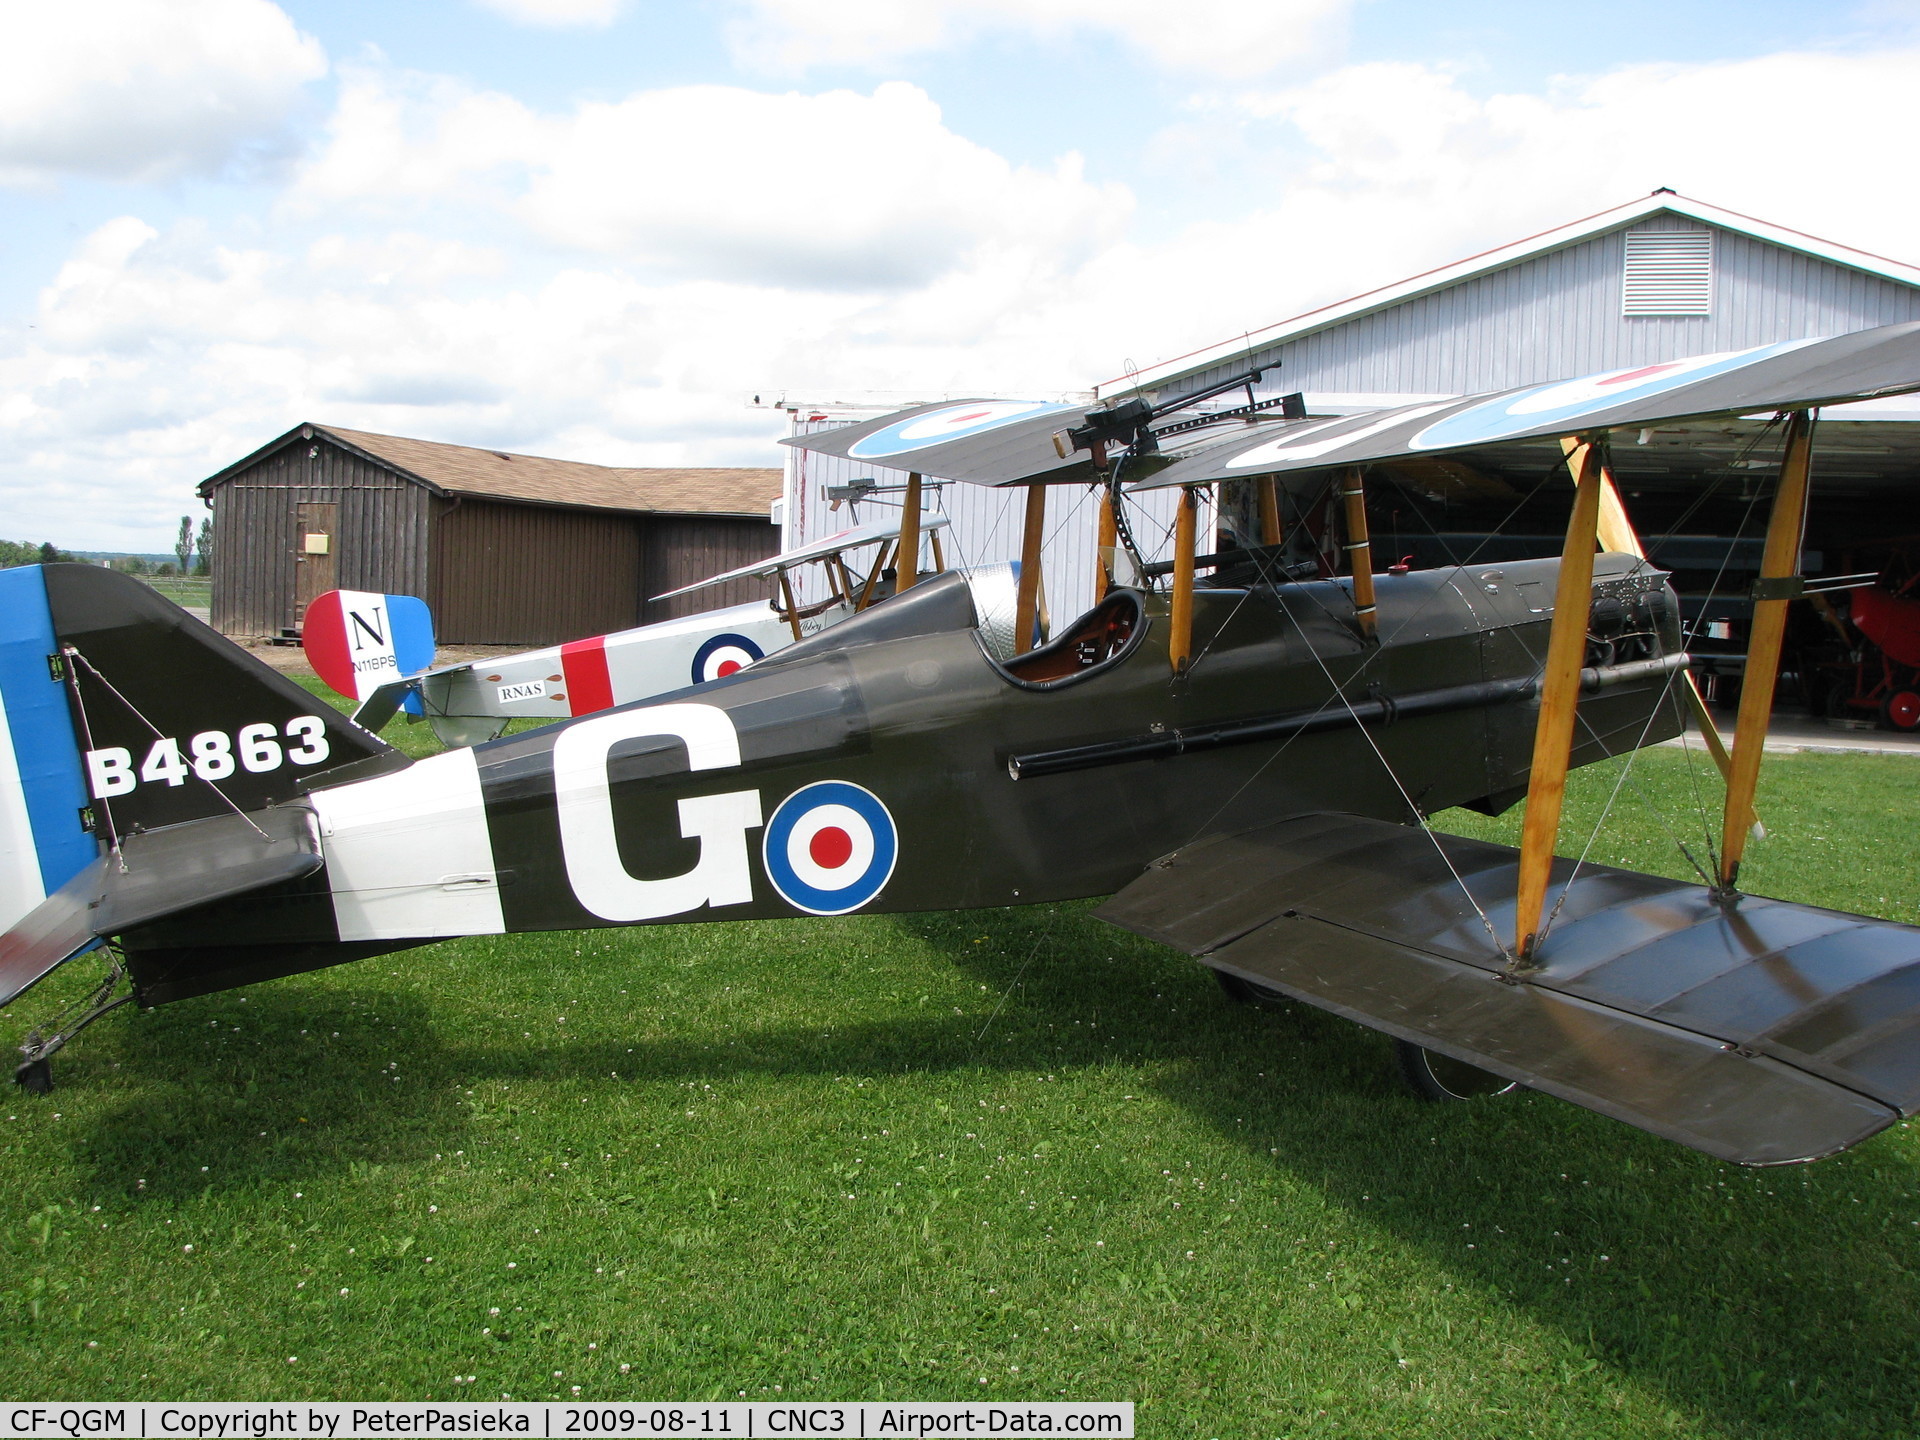 CF-QGM, 1970 Royal Aircraft Factory SE-5A Replica C/N G70 003, 7/8 scale Nieuport 11 visiting The Great War Flying Museum